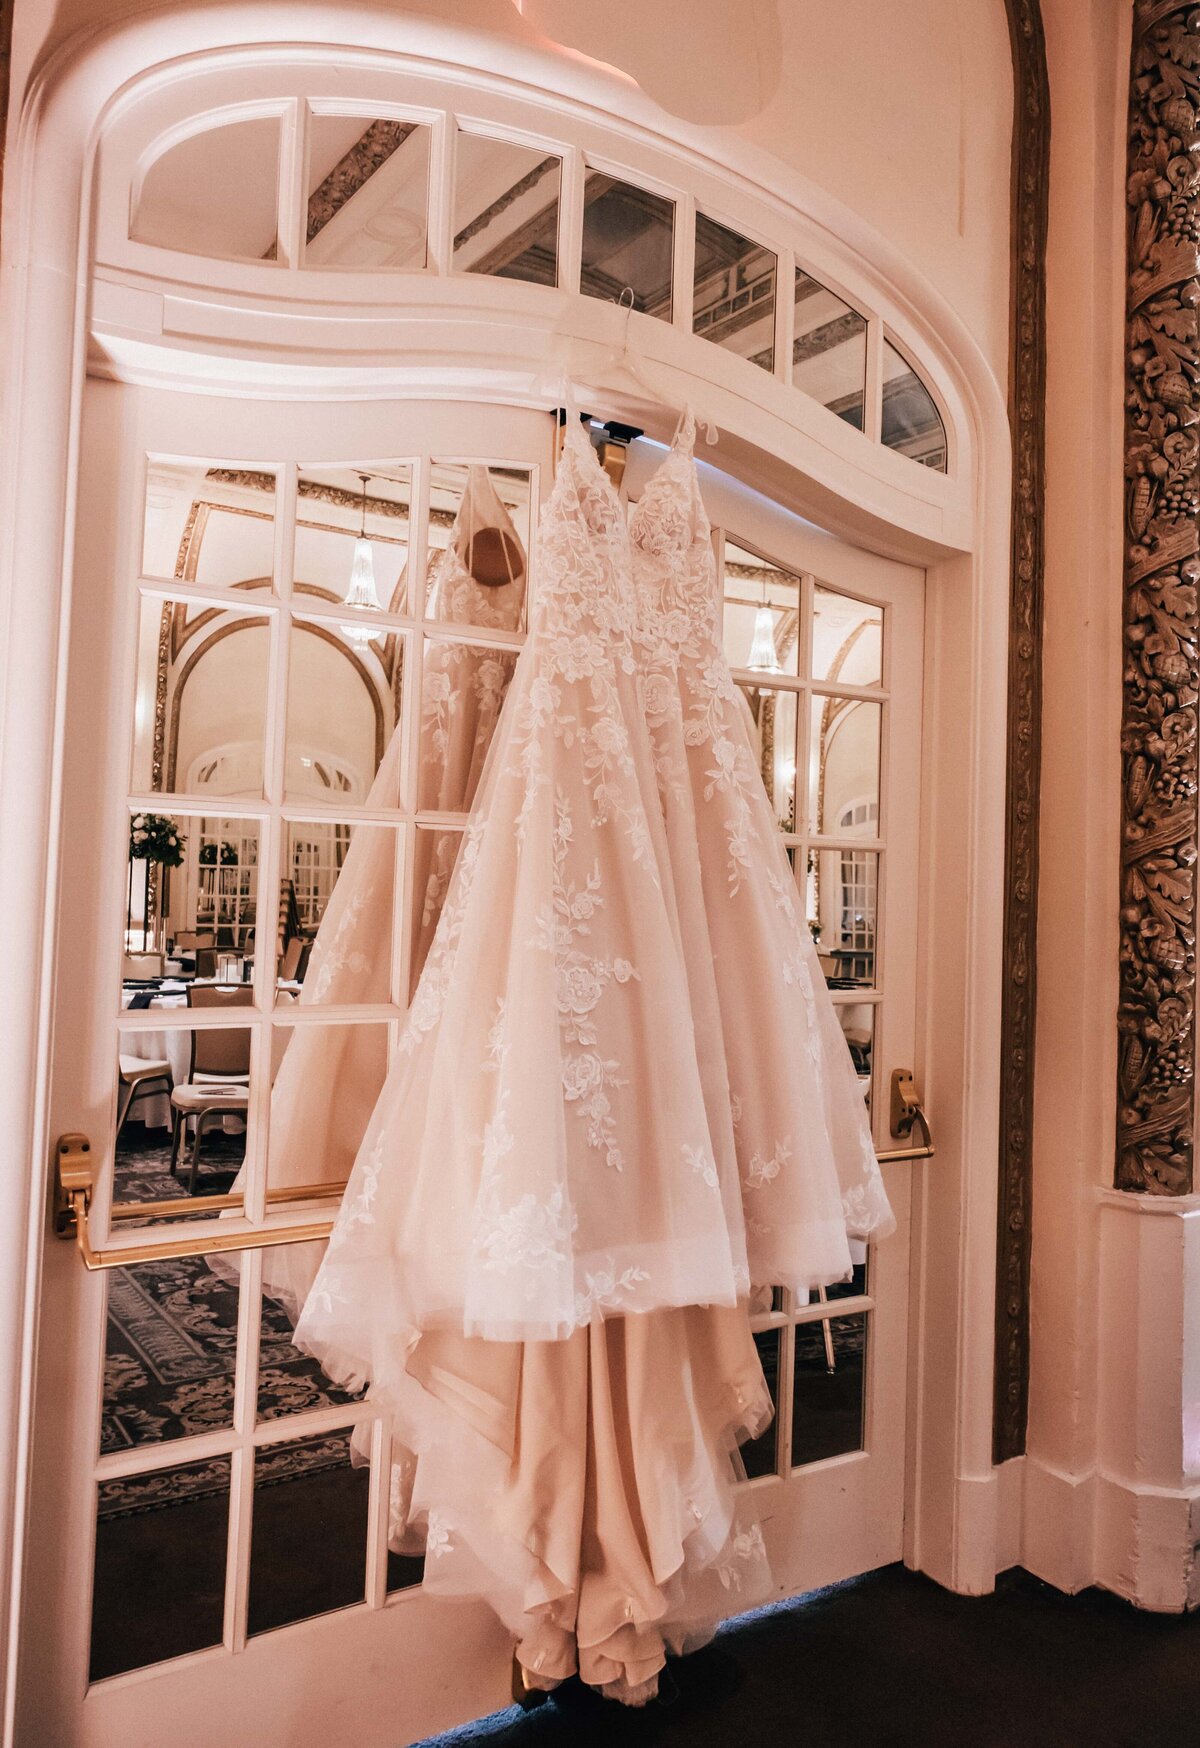 An elegant white wedding dress hanging on an arched doorway in a room with vintage decor at a park farm winery wedding.